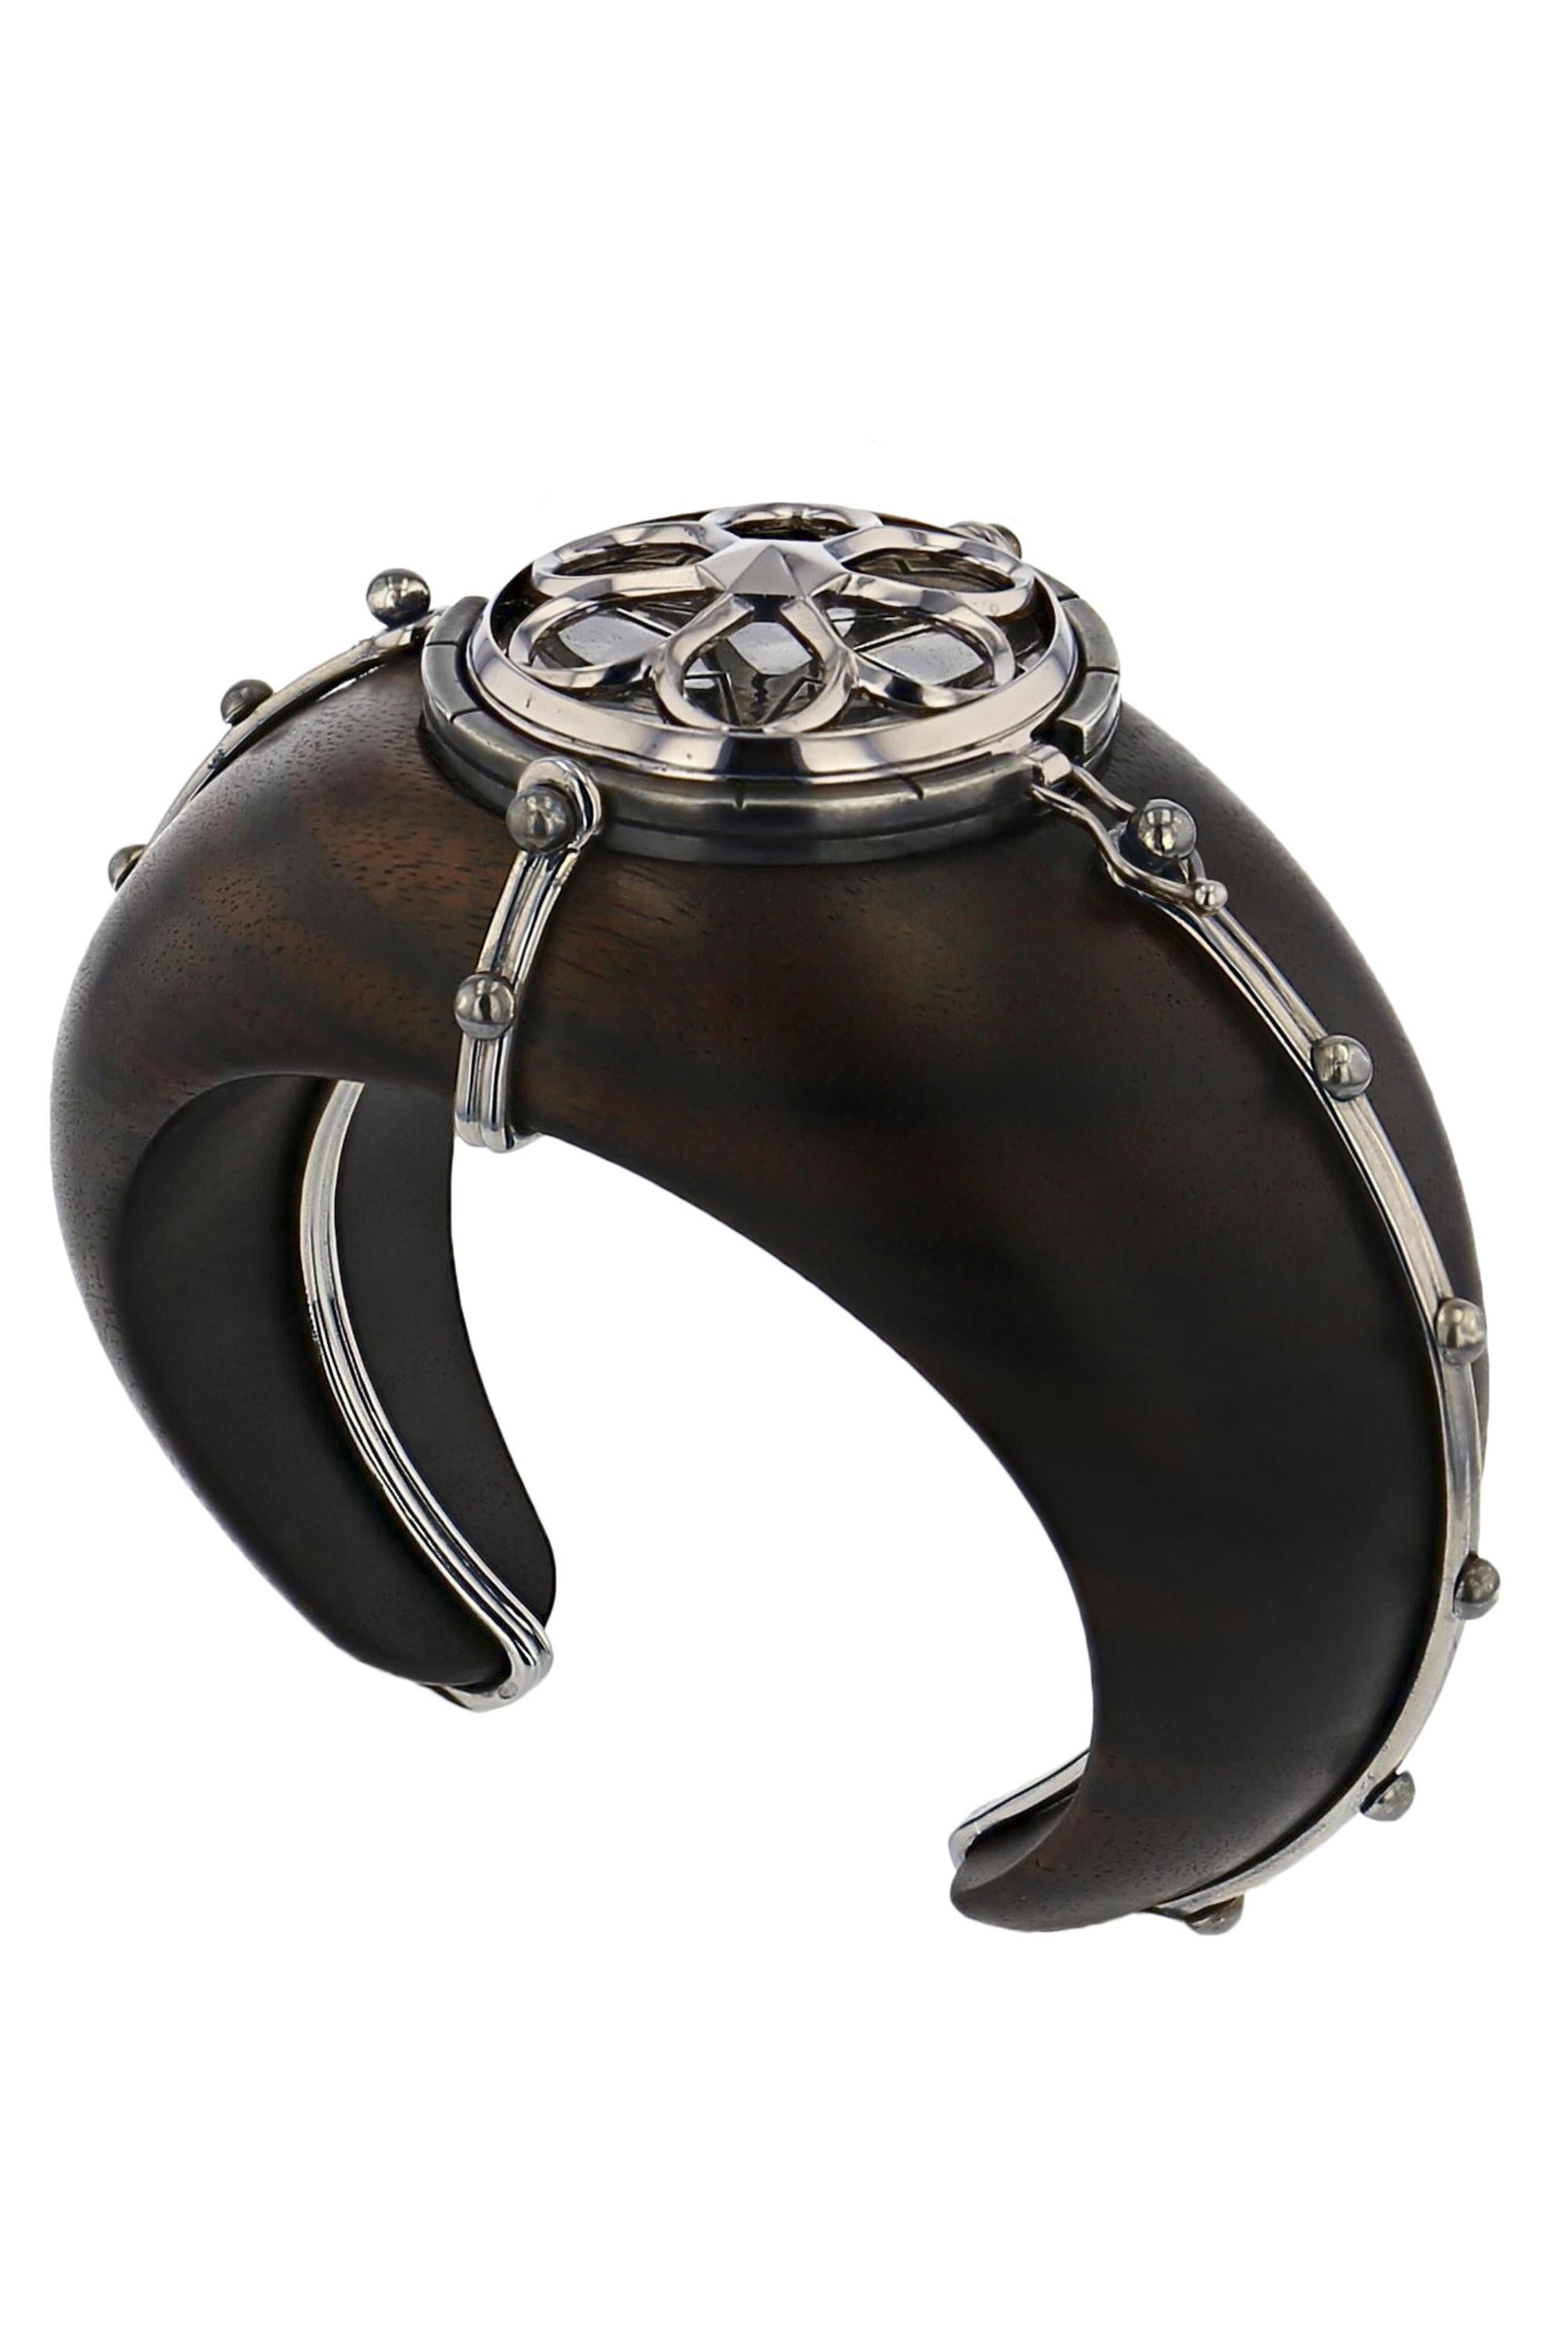 Macassar ebony cuff embellished with a white gold cage, featuring a pivoting disk adorned with a rosette design in grey gold on distressed silver, revealing a pierced dome studded with diamonds and blue topazes, accented with lapis lazuli and